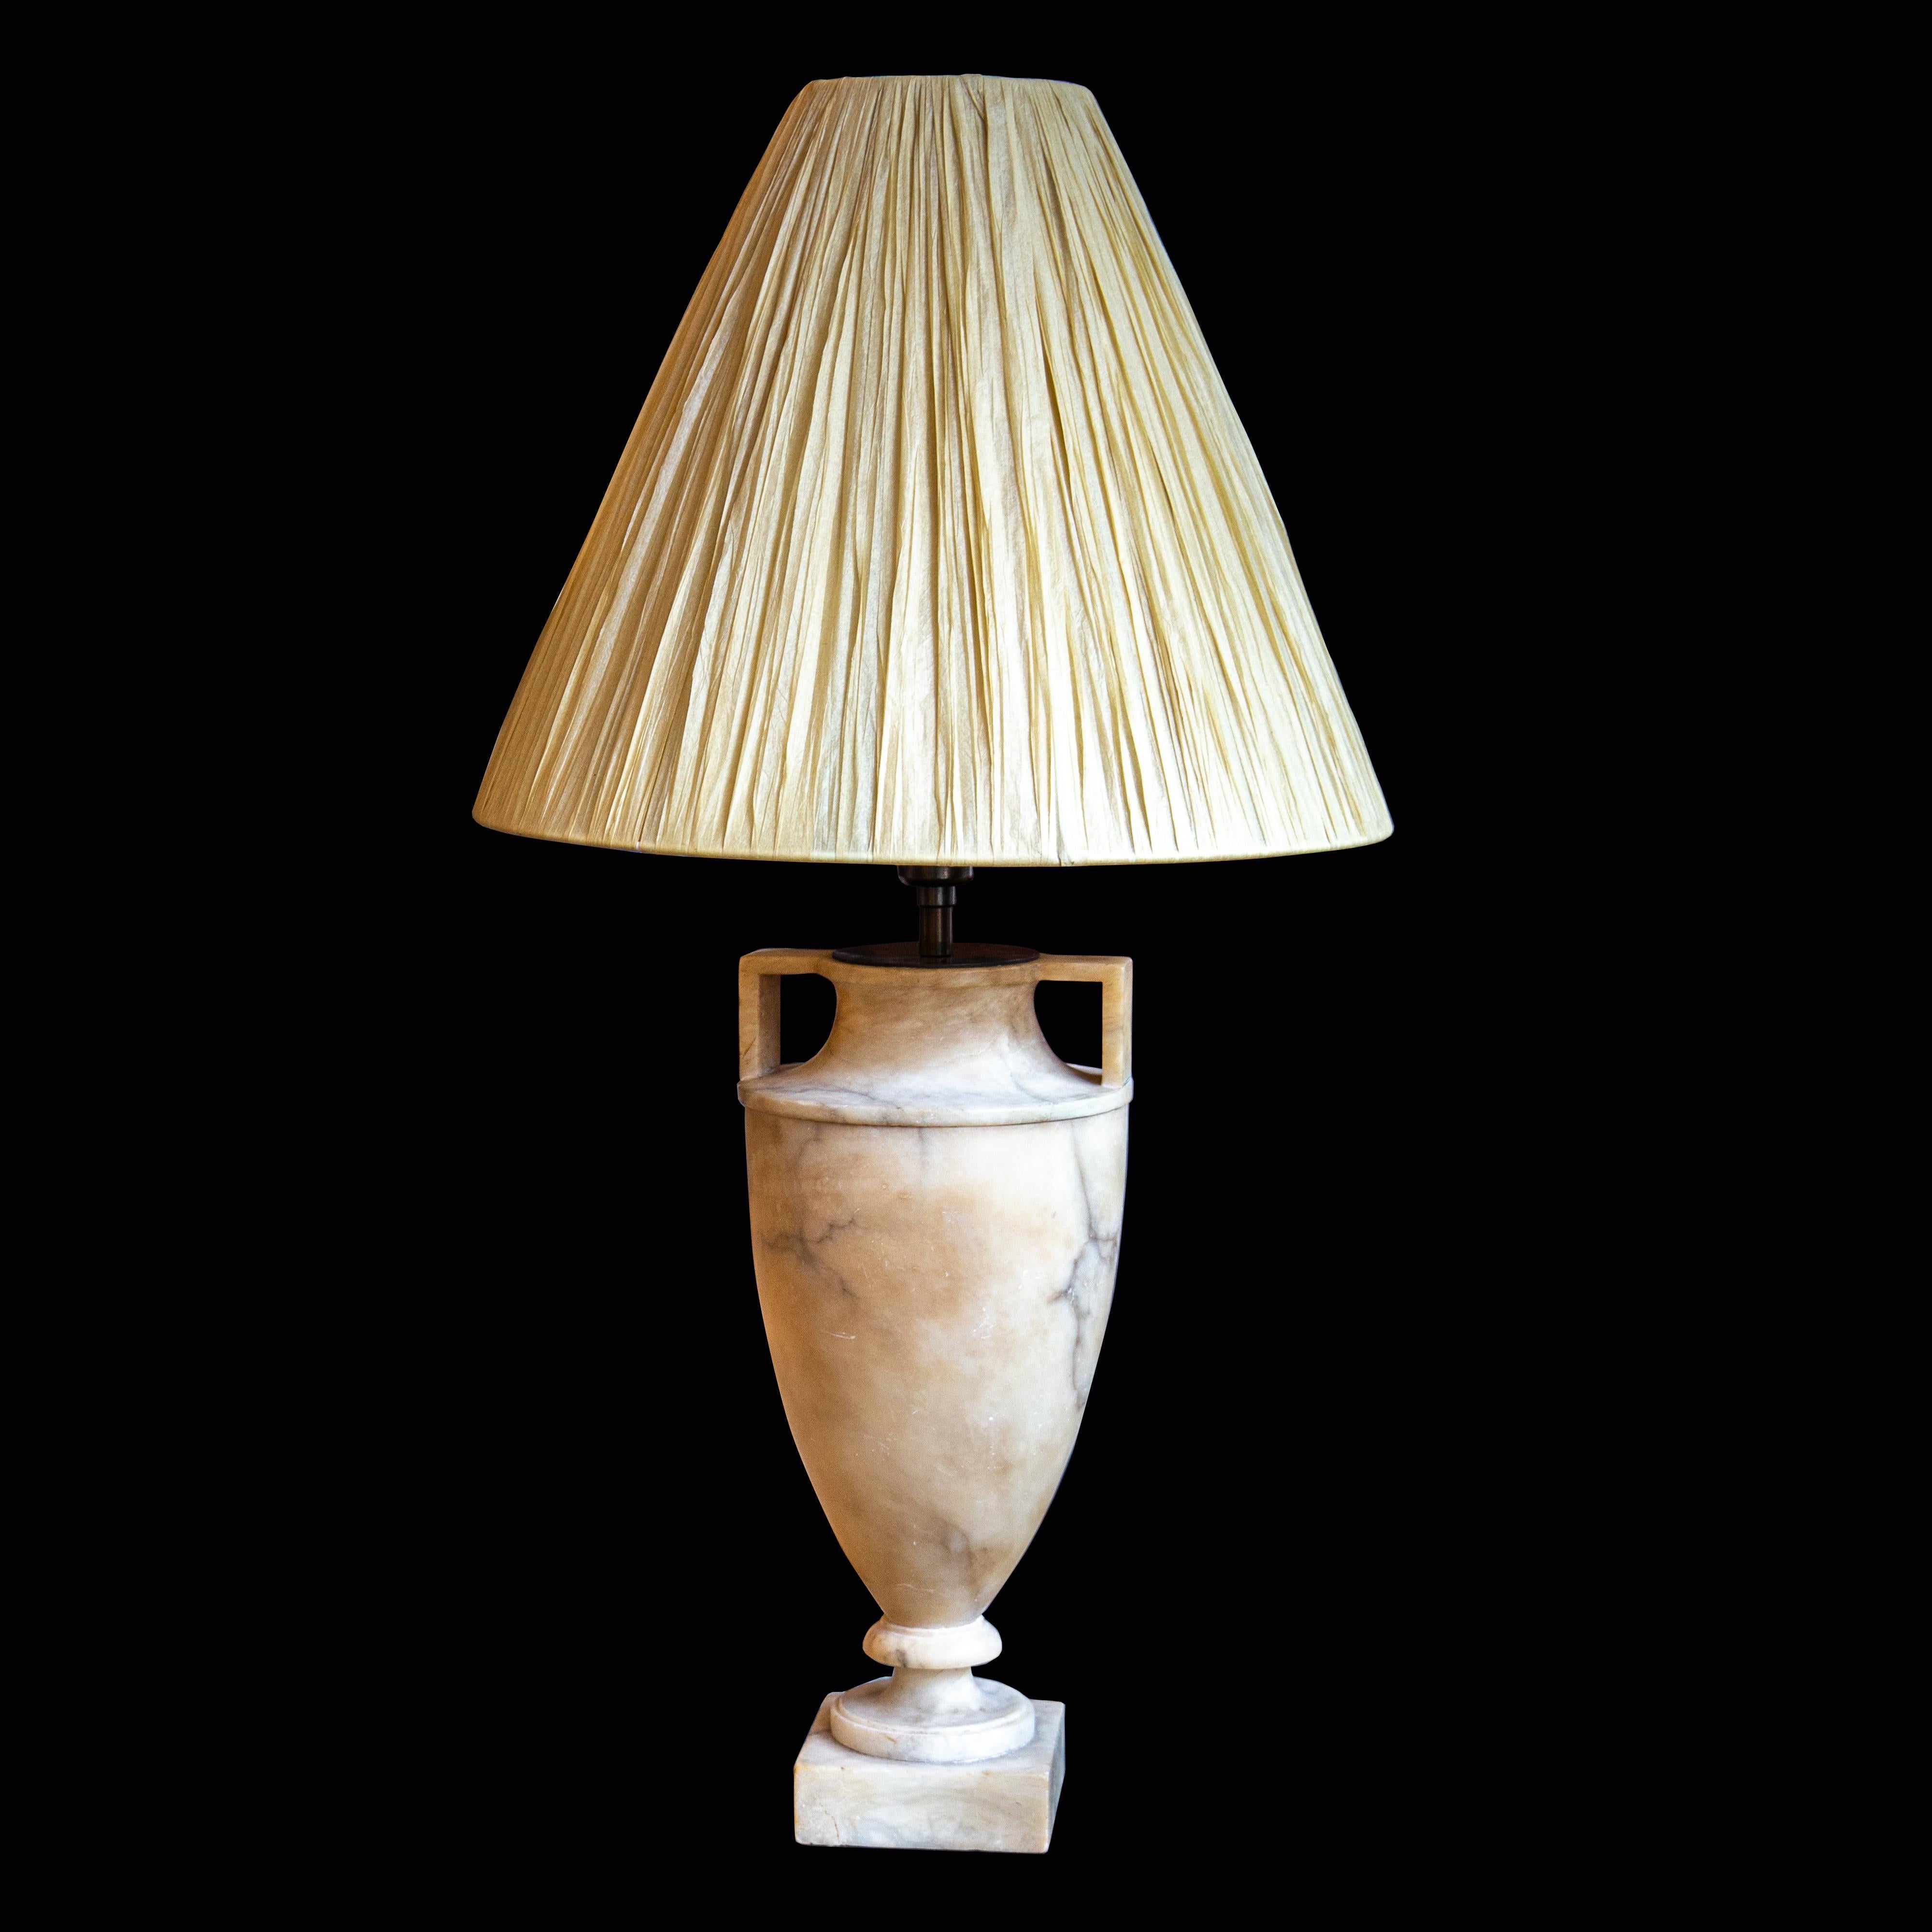 Grand Tour Late 19th Century Alabaster Amphora Urn Table Lamp with Bespoke Raffia Shade For Sale